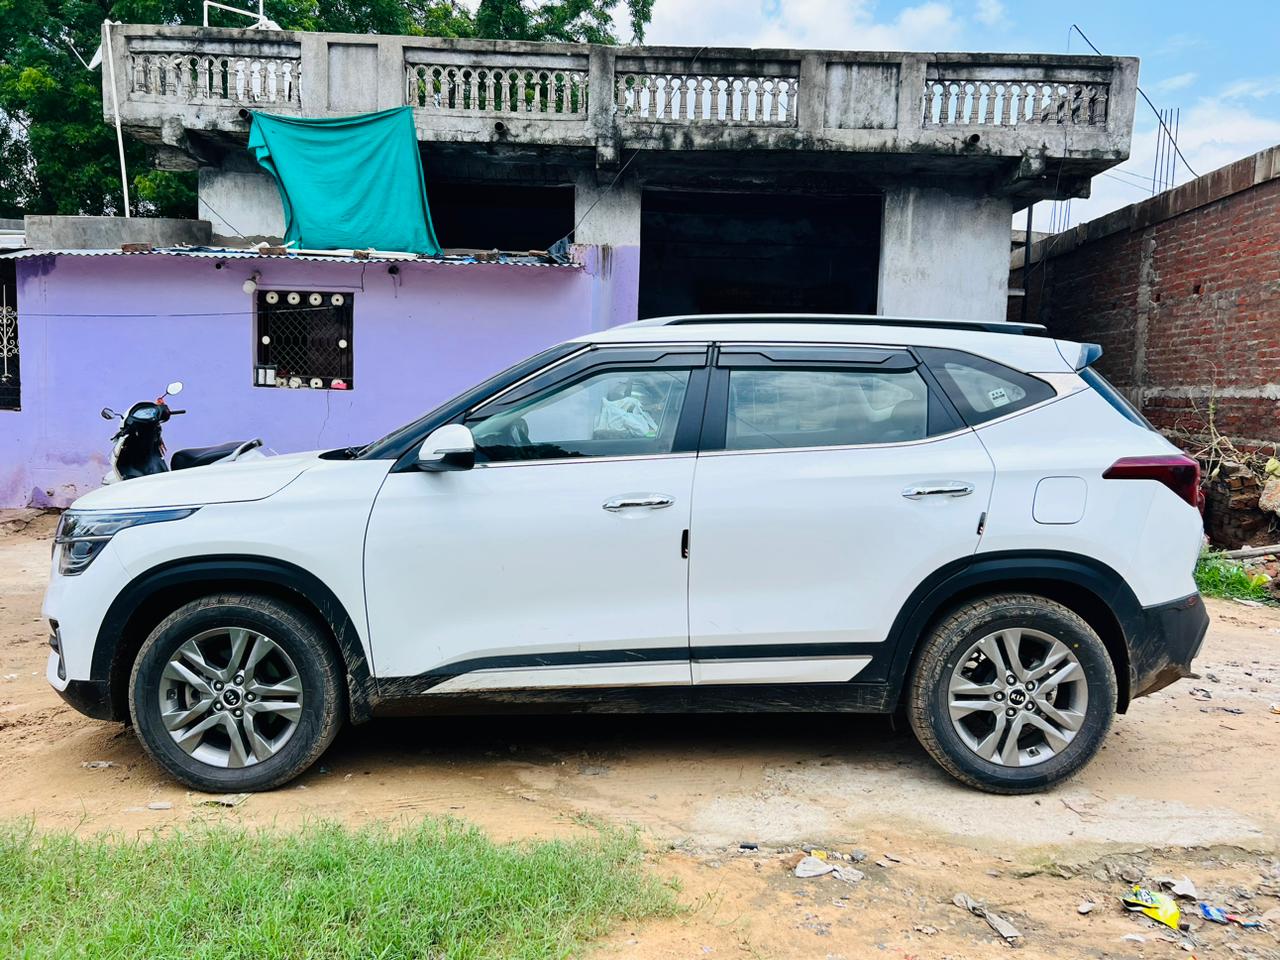 Details View - Kia seltos photos - reseller,reseller marketplace,advetising your products,reseller bazzar,resellerbazzar.in,india's classified site,Kia seltos , used Kia seltos , old Kia seltos , old Kia seltos in Ahmedabad, Kia seltos in Ahmedabad